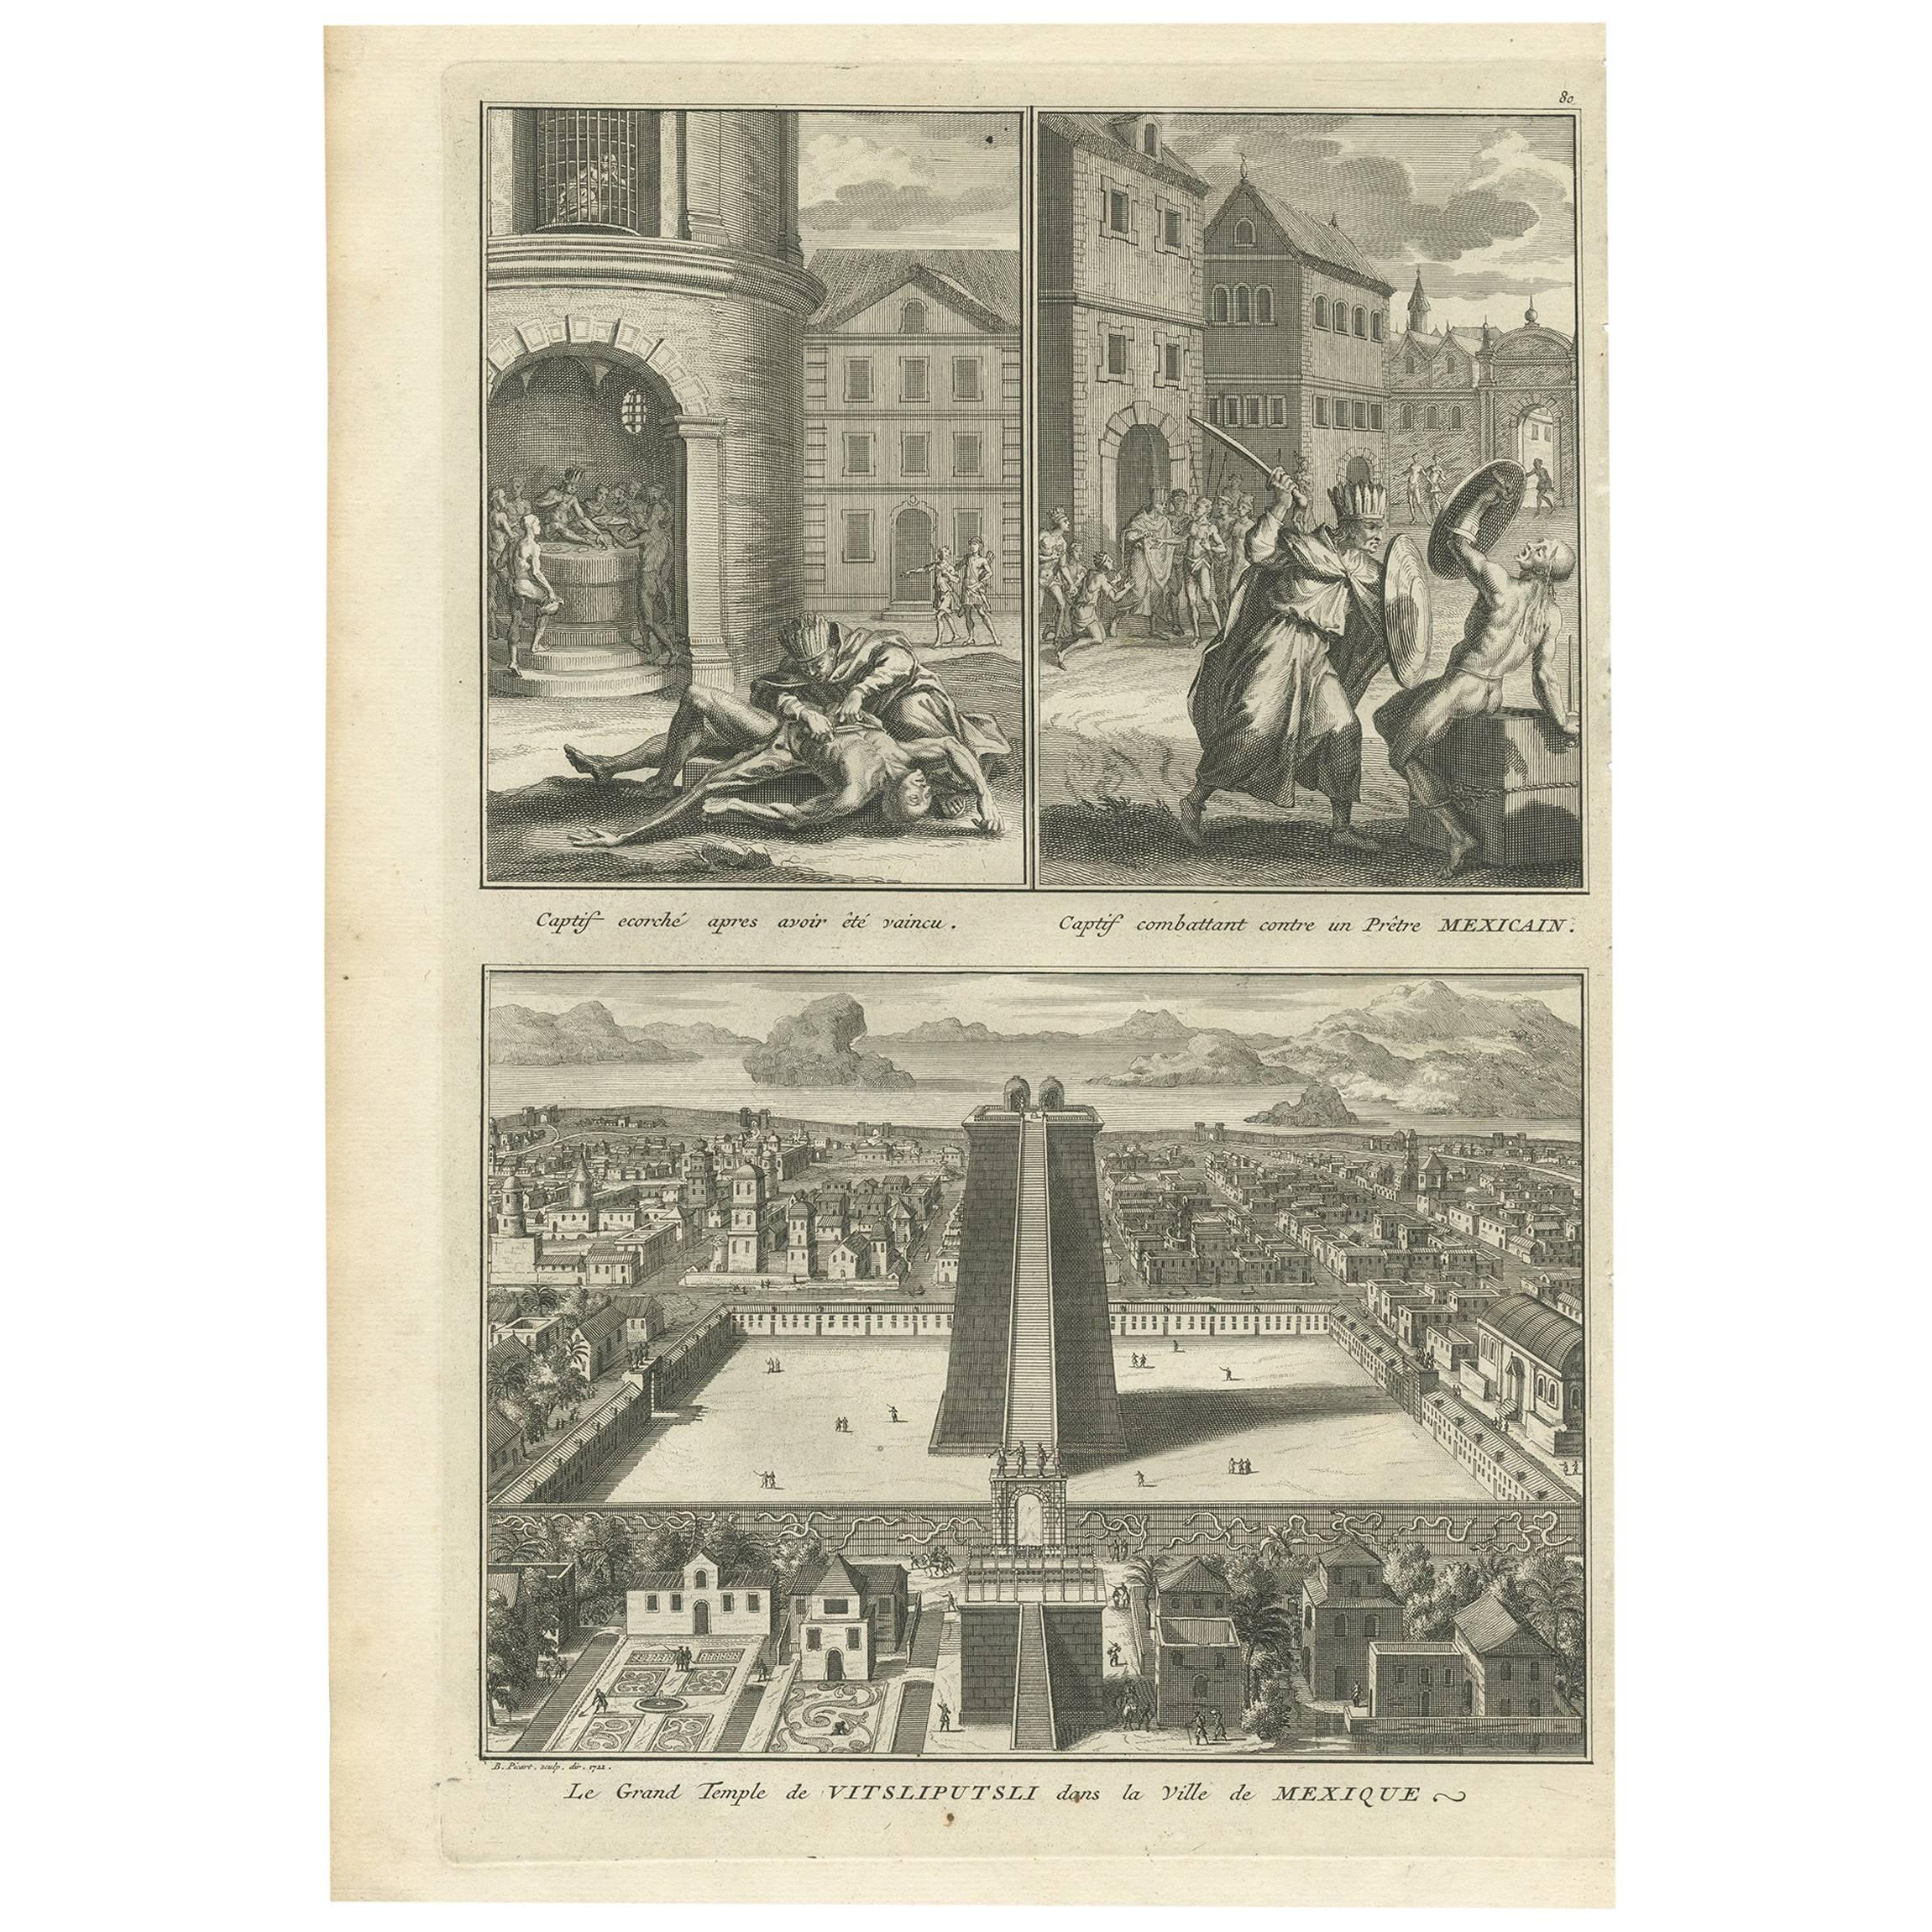 Antique Print of Captives and the Great Temple of Vitsliputsli "Mexico"